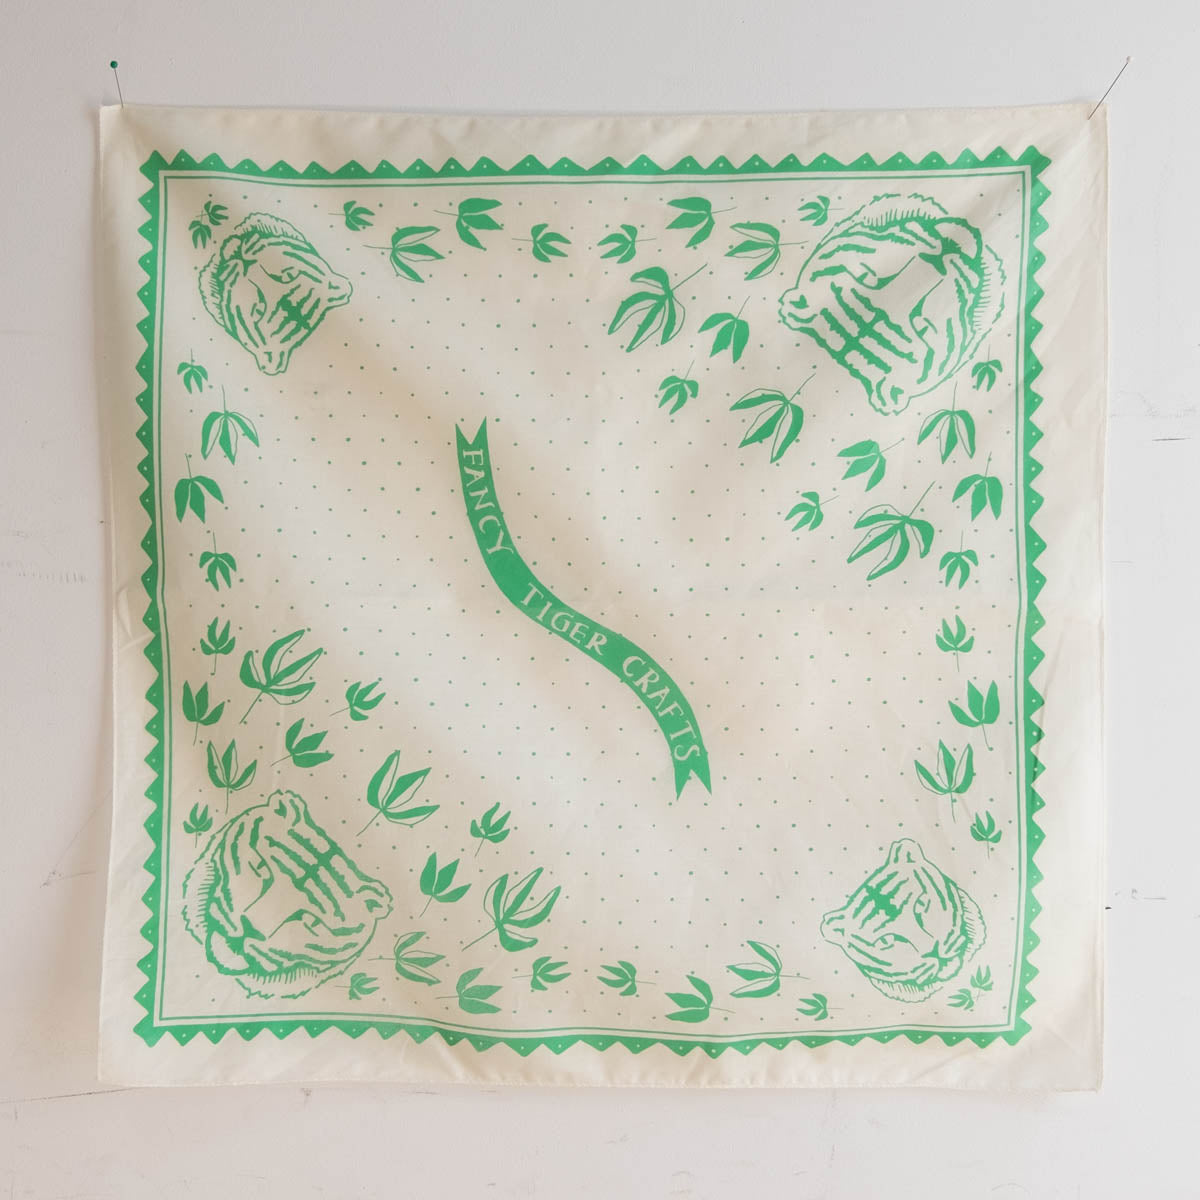 An off-white bandana, screenprinted in mint green, with a design featuring tiger faces and peony leaves. A banner that says "Fancy Tiger Crafts" is at the center of the design.  